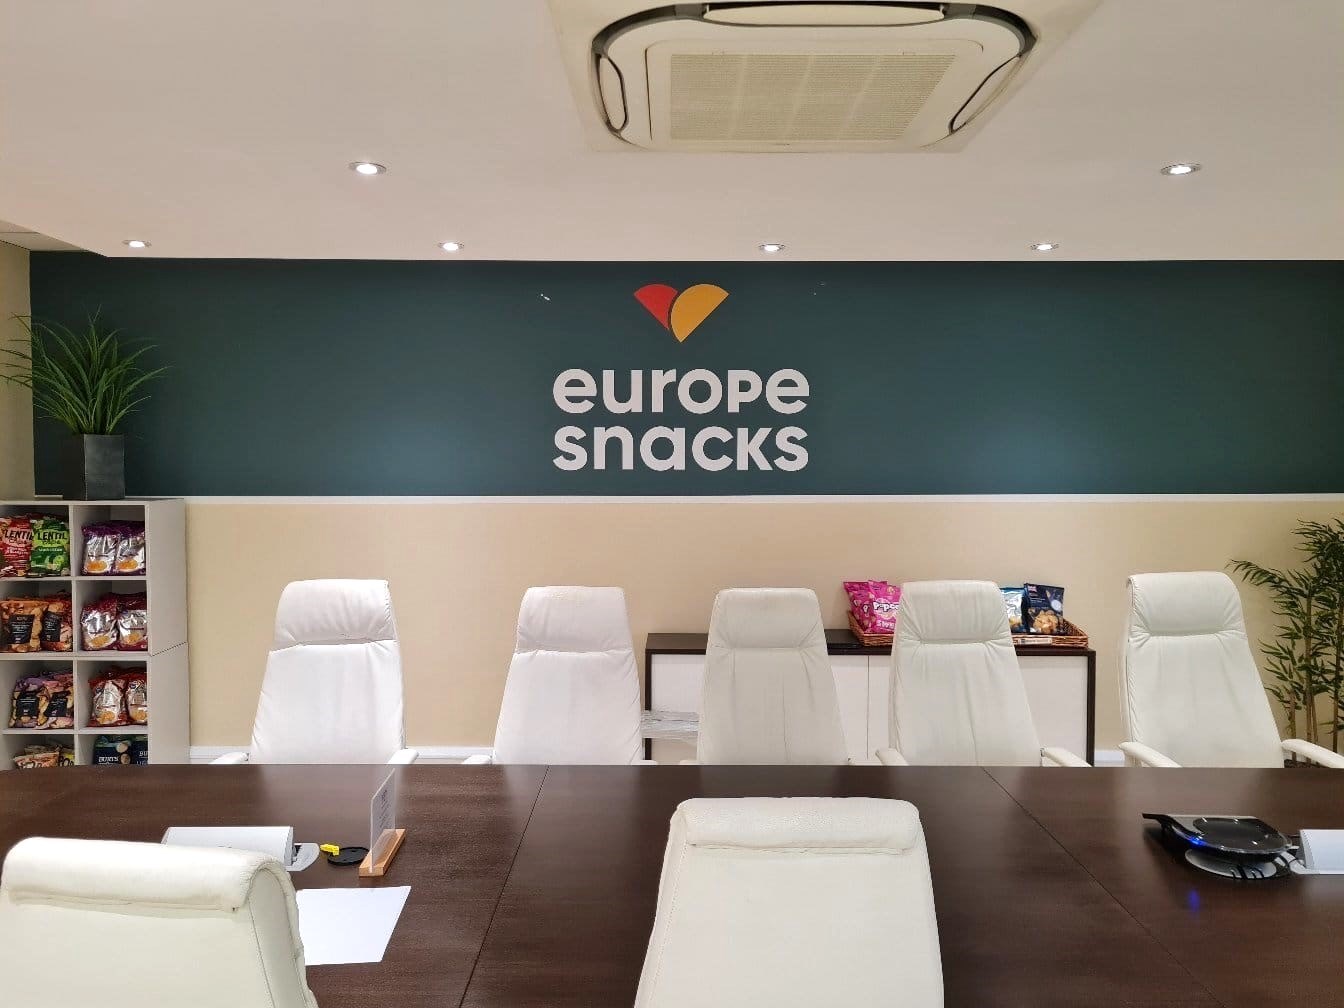 Digitally Printed Meeting Room Wall Graphics Europe Snacks Europe Snacks Signs Express Leicester